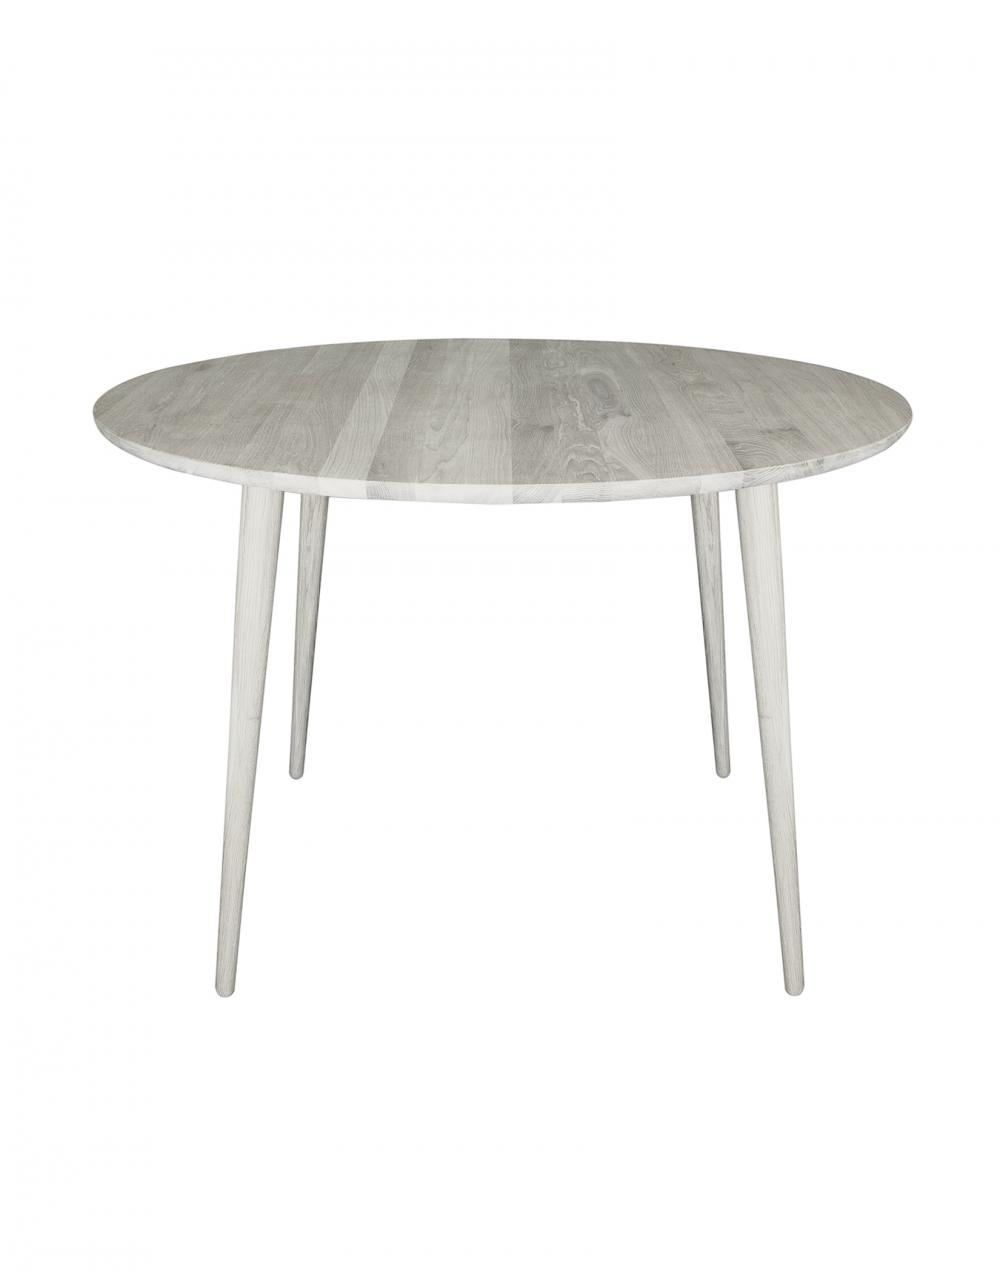 Non Dining Table 110cm Round White Oiled